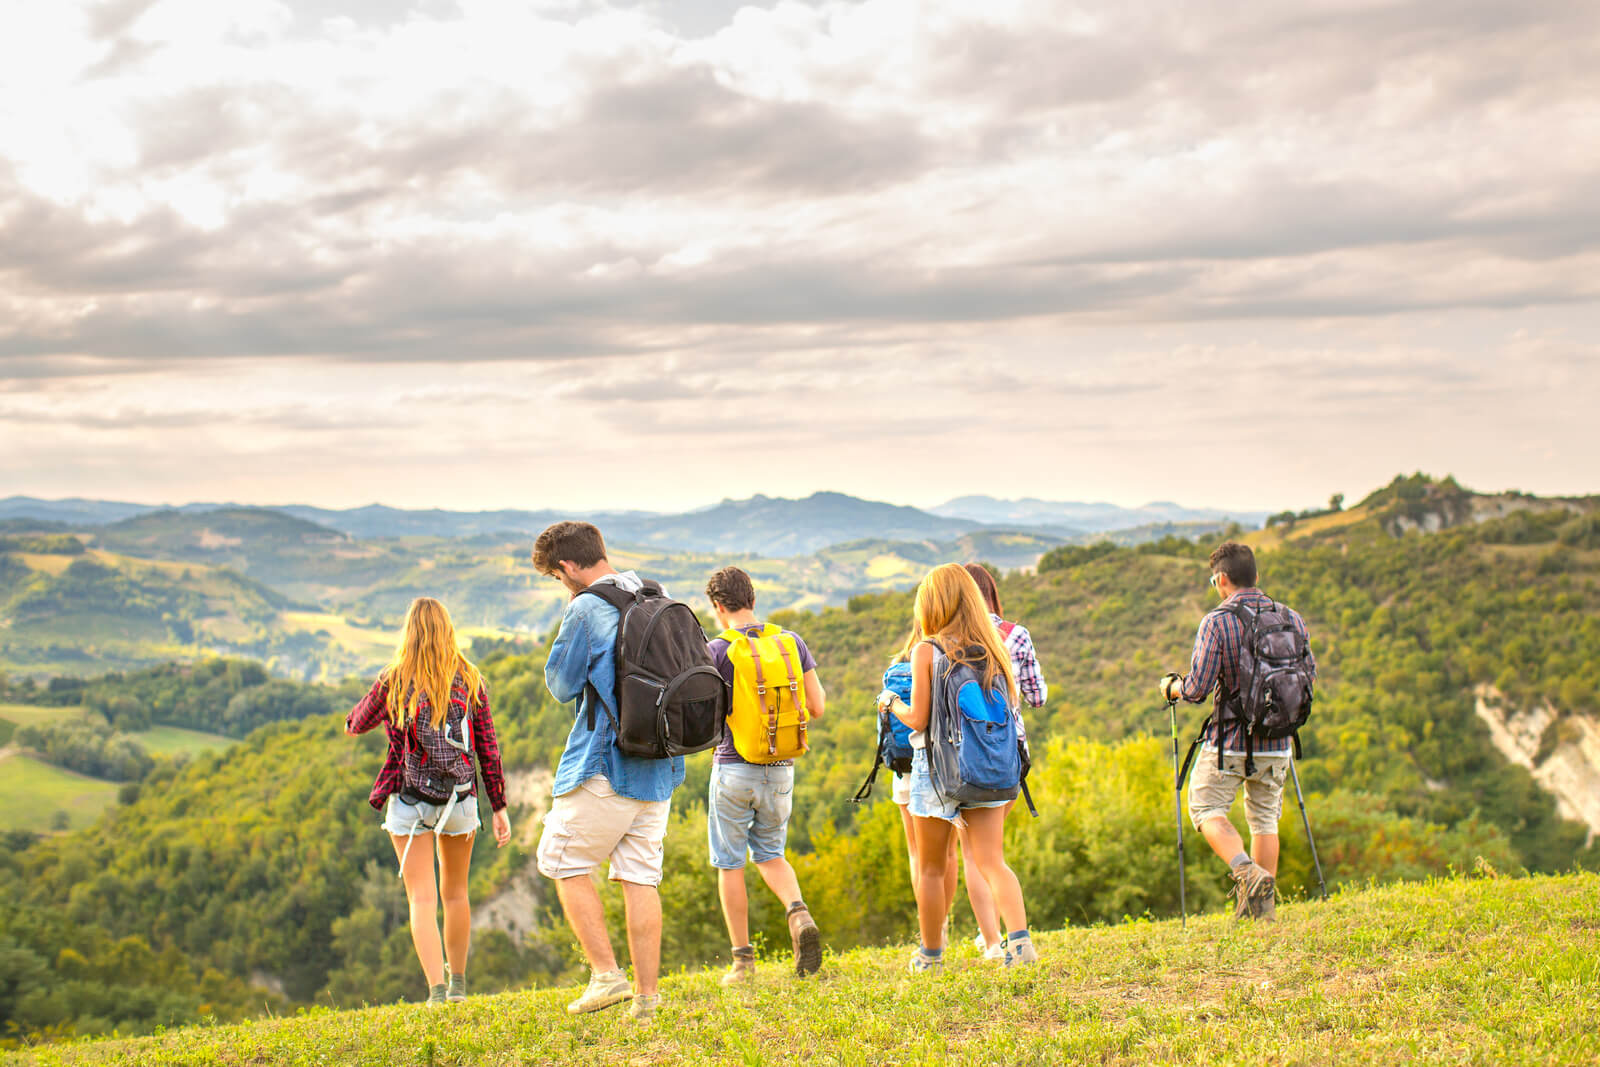 A group of people wearing backpacks, walking through green hills - incentive travel services